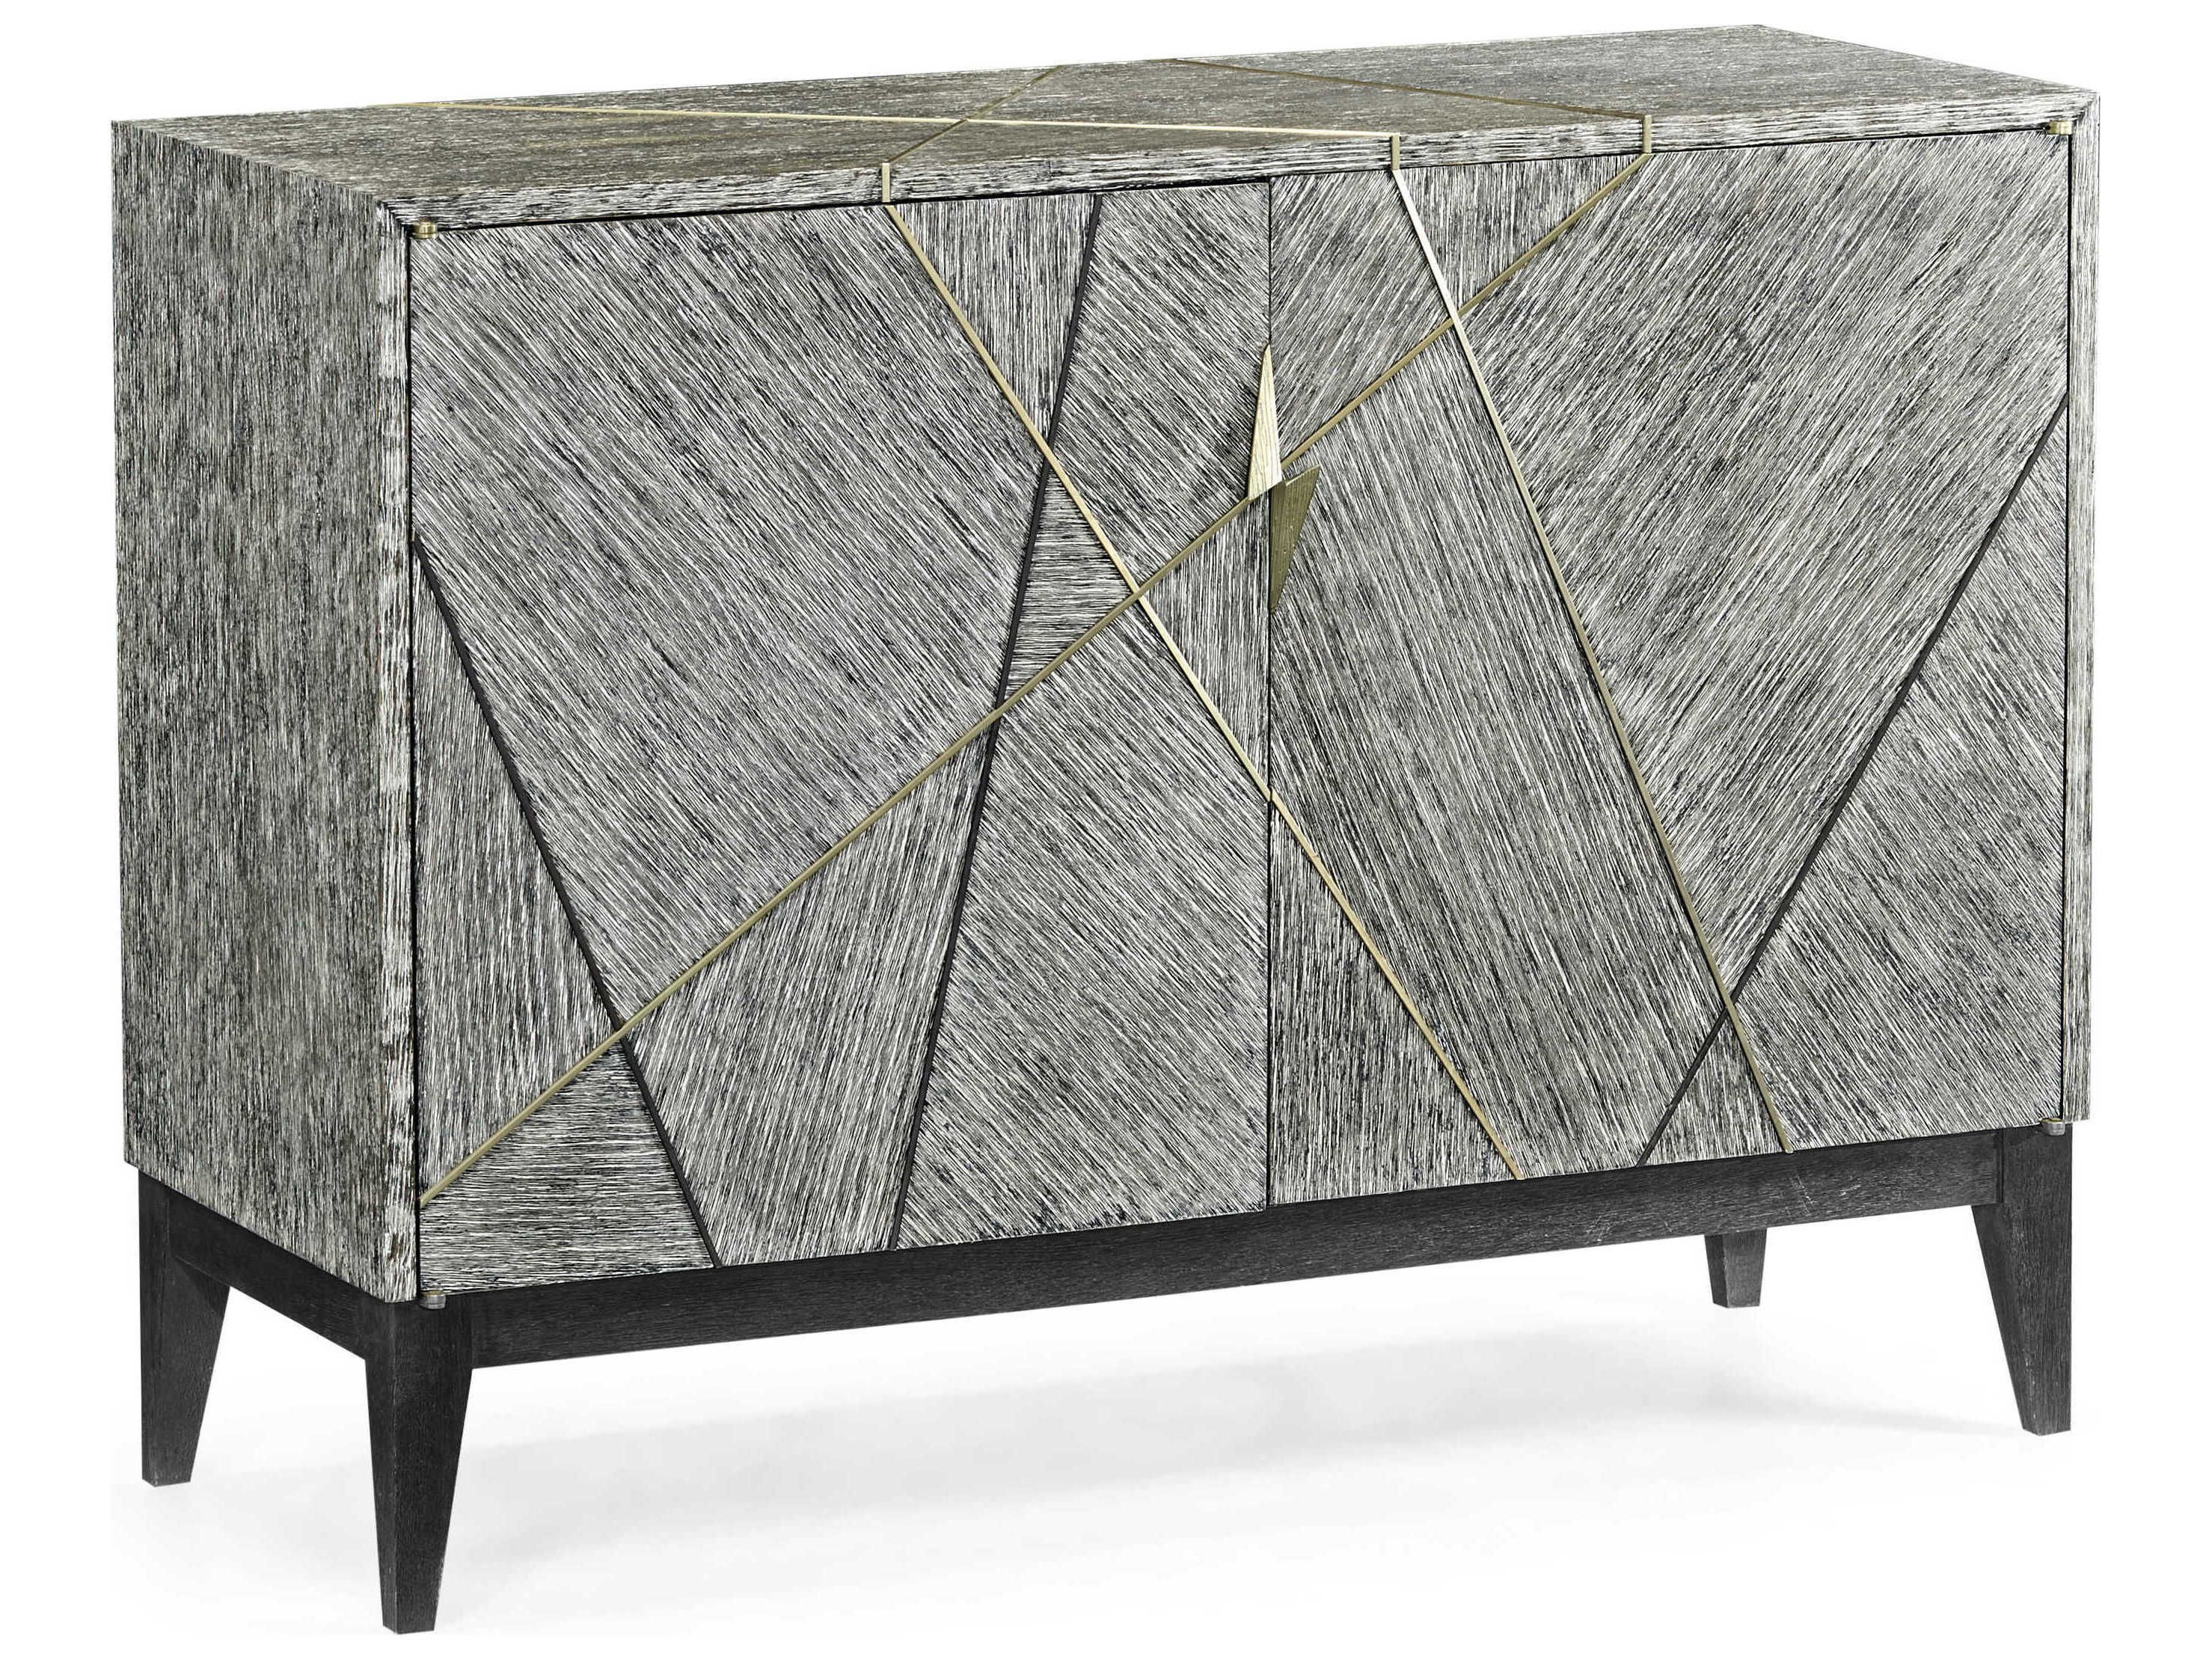 Jonathan Charles Geometric 45'' Sideboard | Jc500288dfo With Regard To Geometric Sideboards (View 10 of 15)